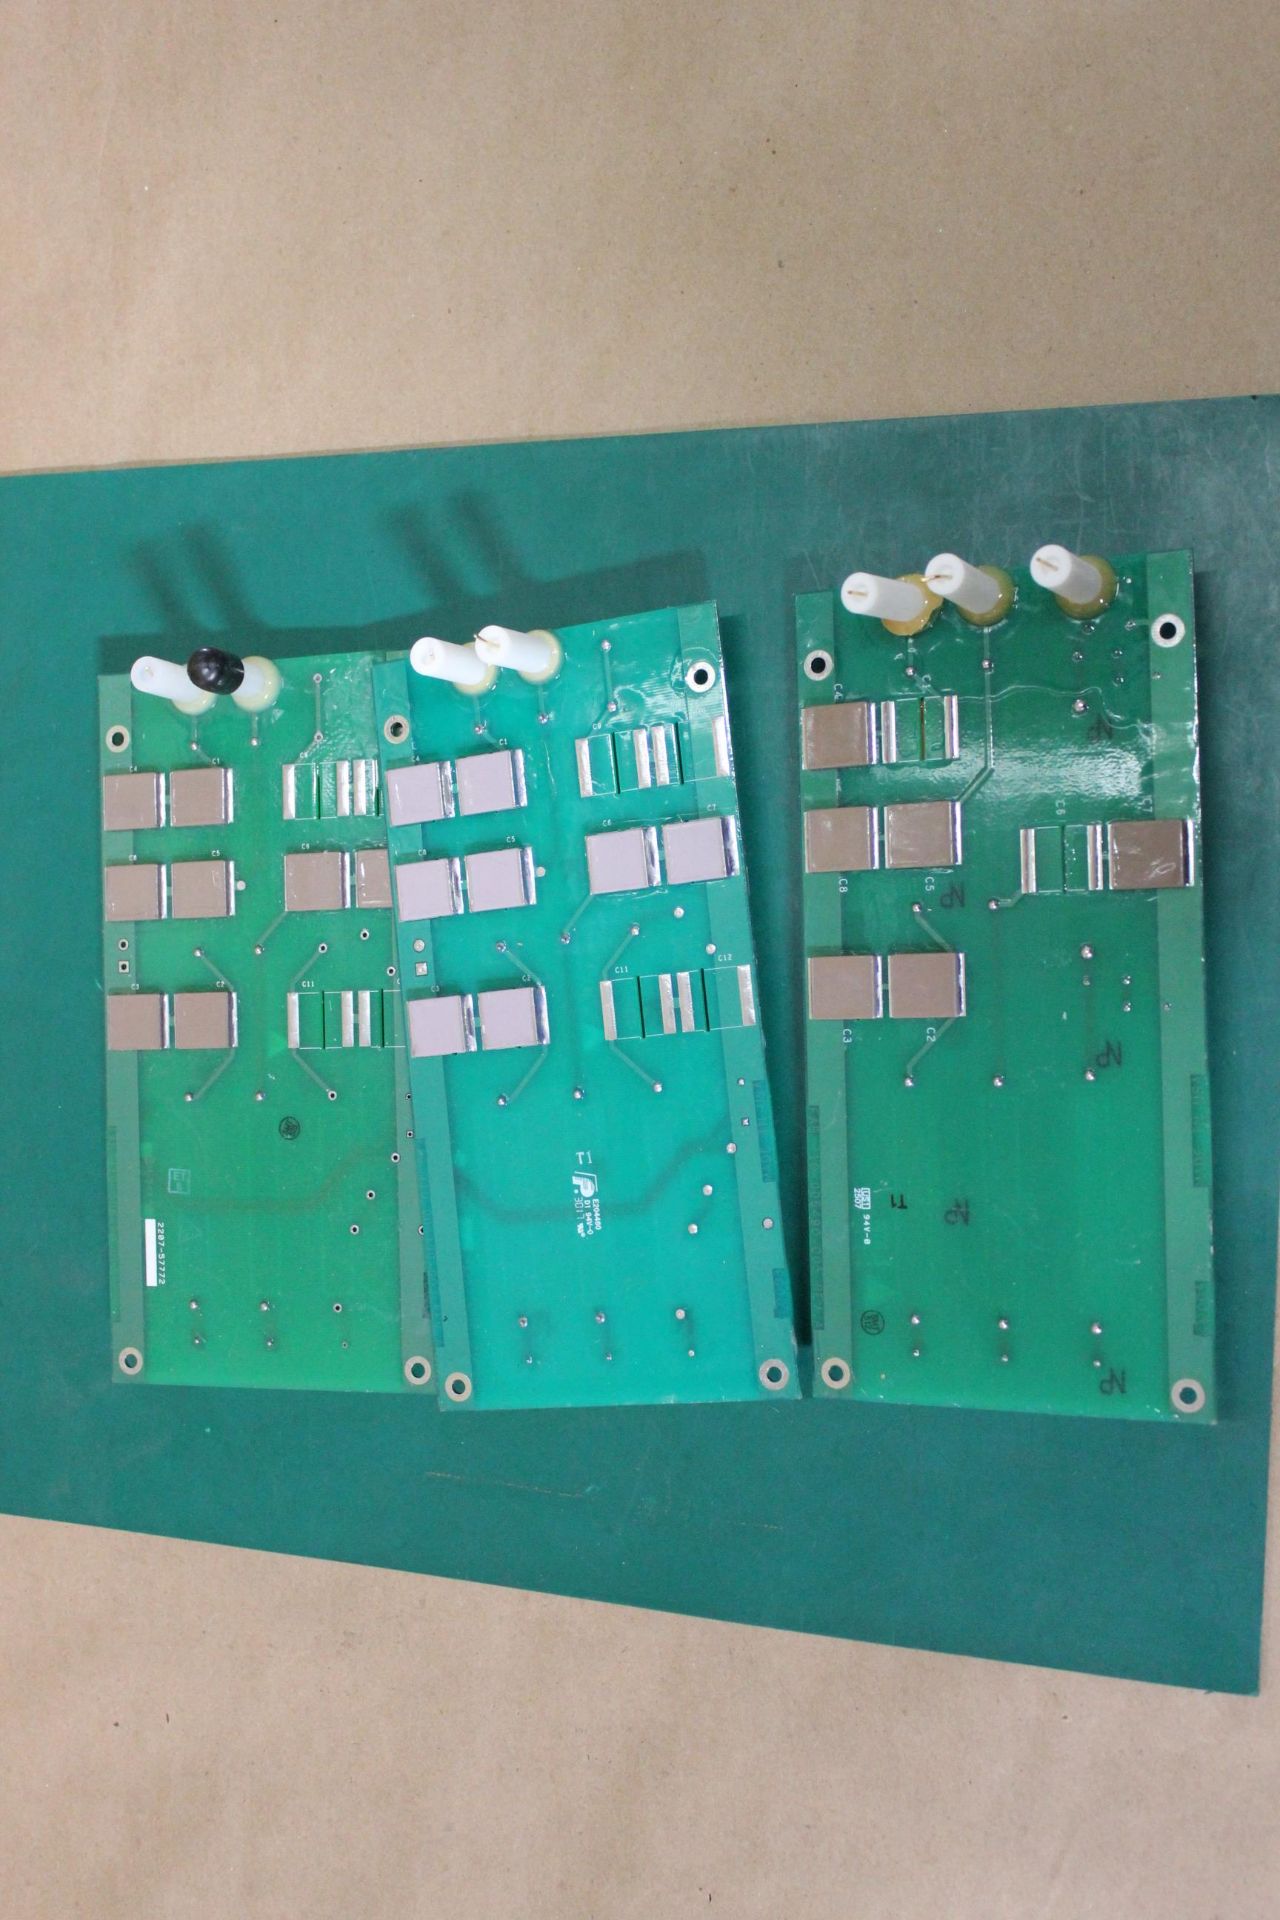 LOT OF LAM RESEARCH CIRCUIT BOARDS - Image 7 of 10